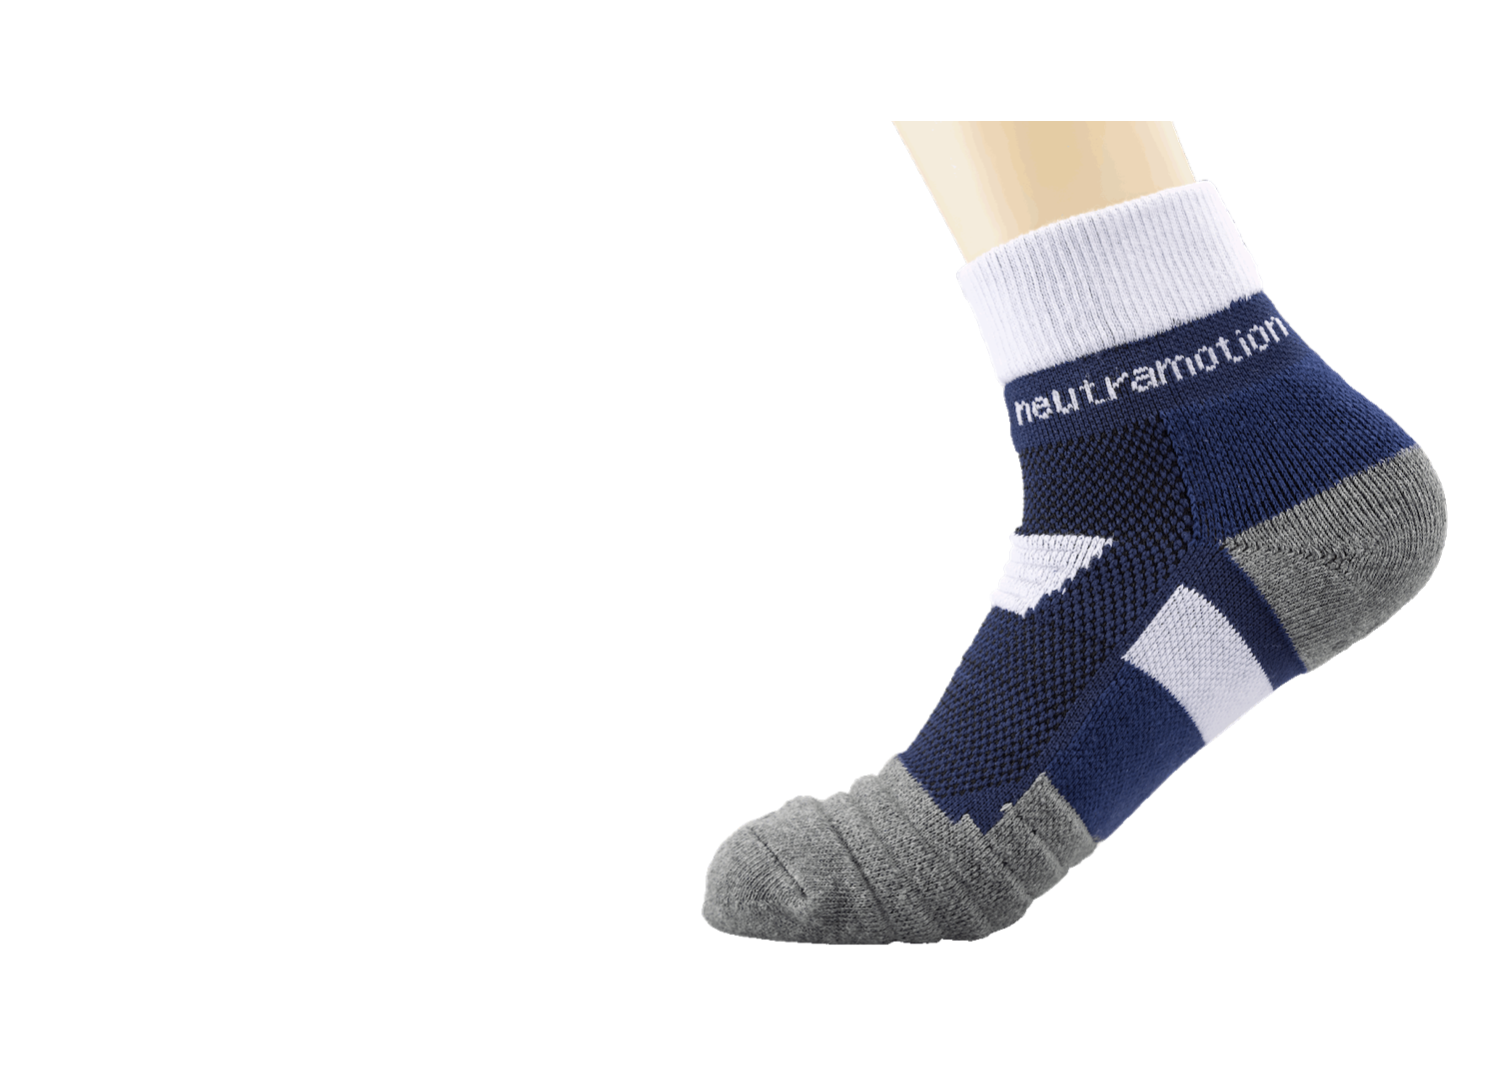 Now you can enjoy the comfort of high-performance arch support socks, scientifically developed using extensive R&D on the ‘Power of the Arch’.